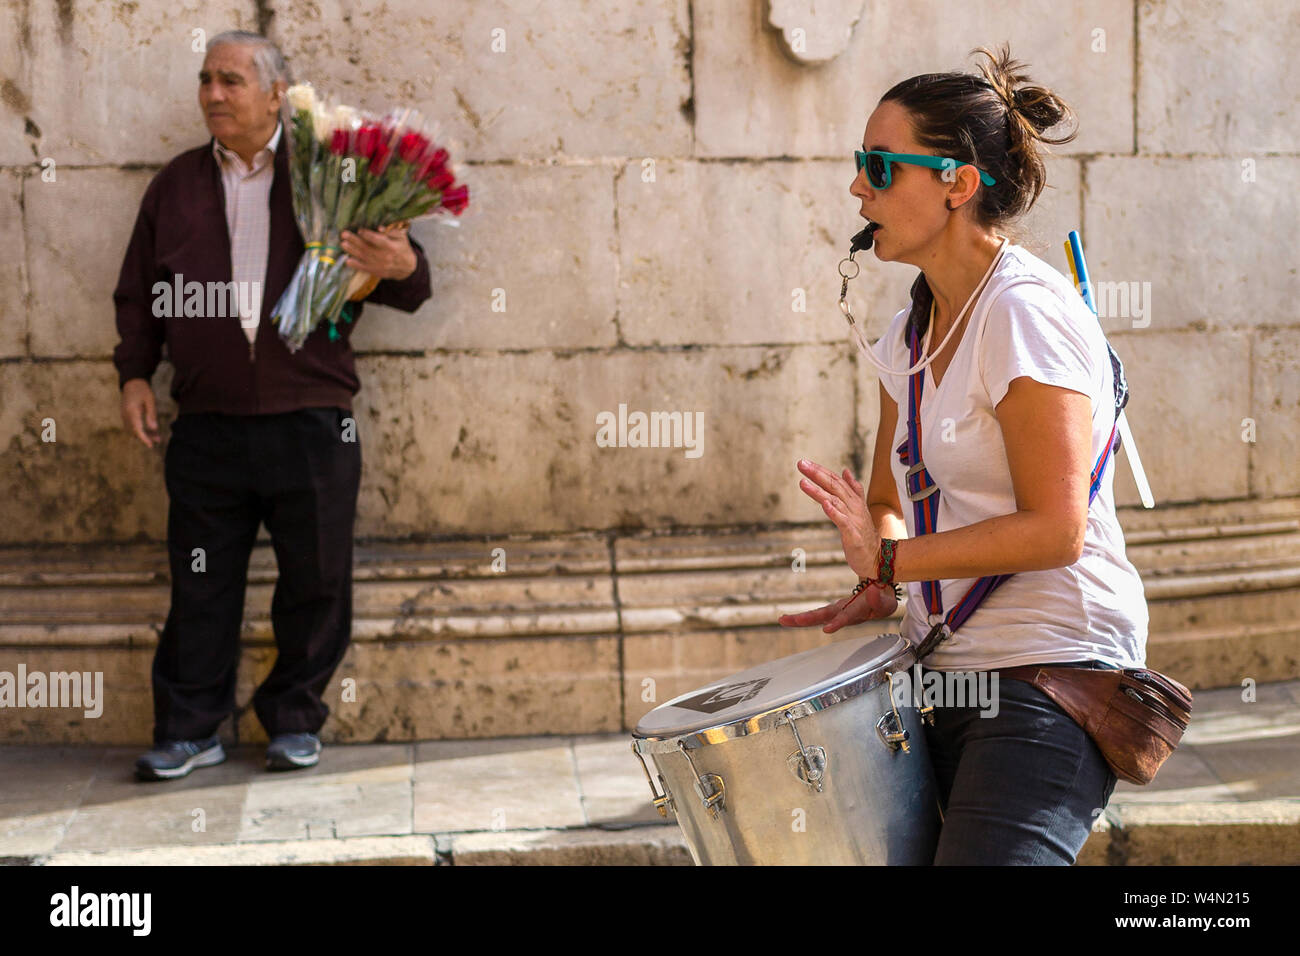 Woman drummer protesting in march with older man flower seller in background, Malaga, Spain Stock Photo